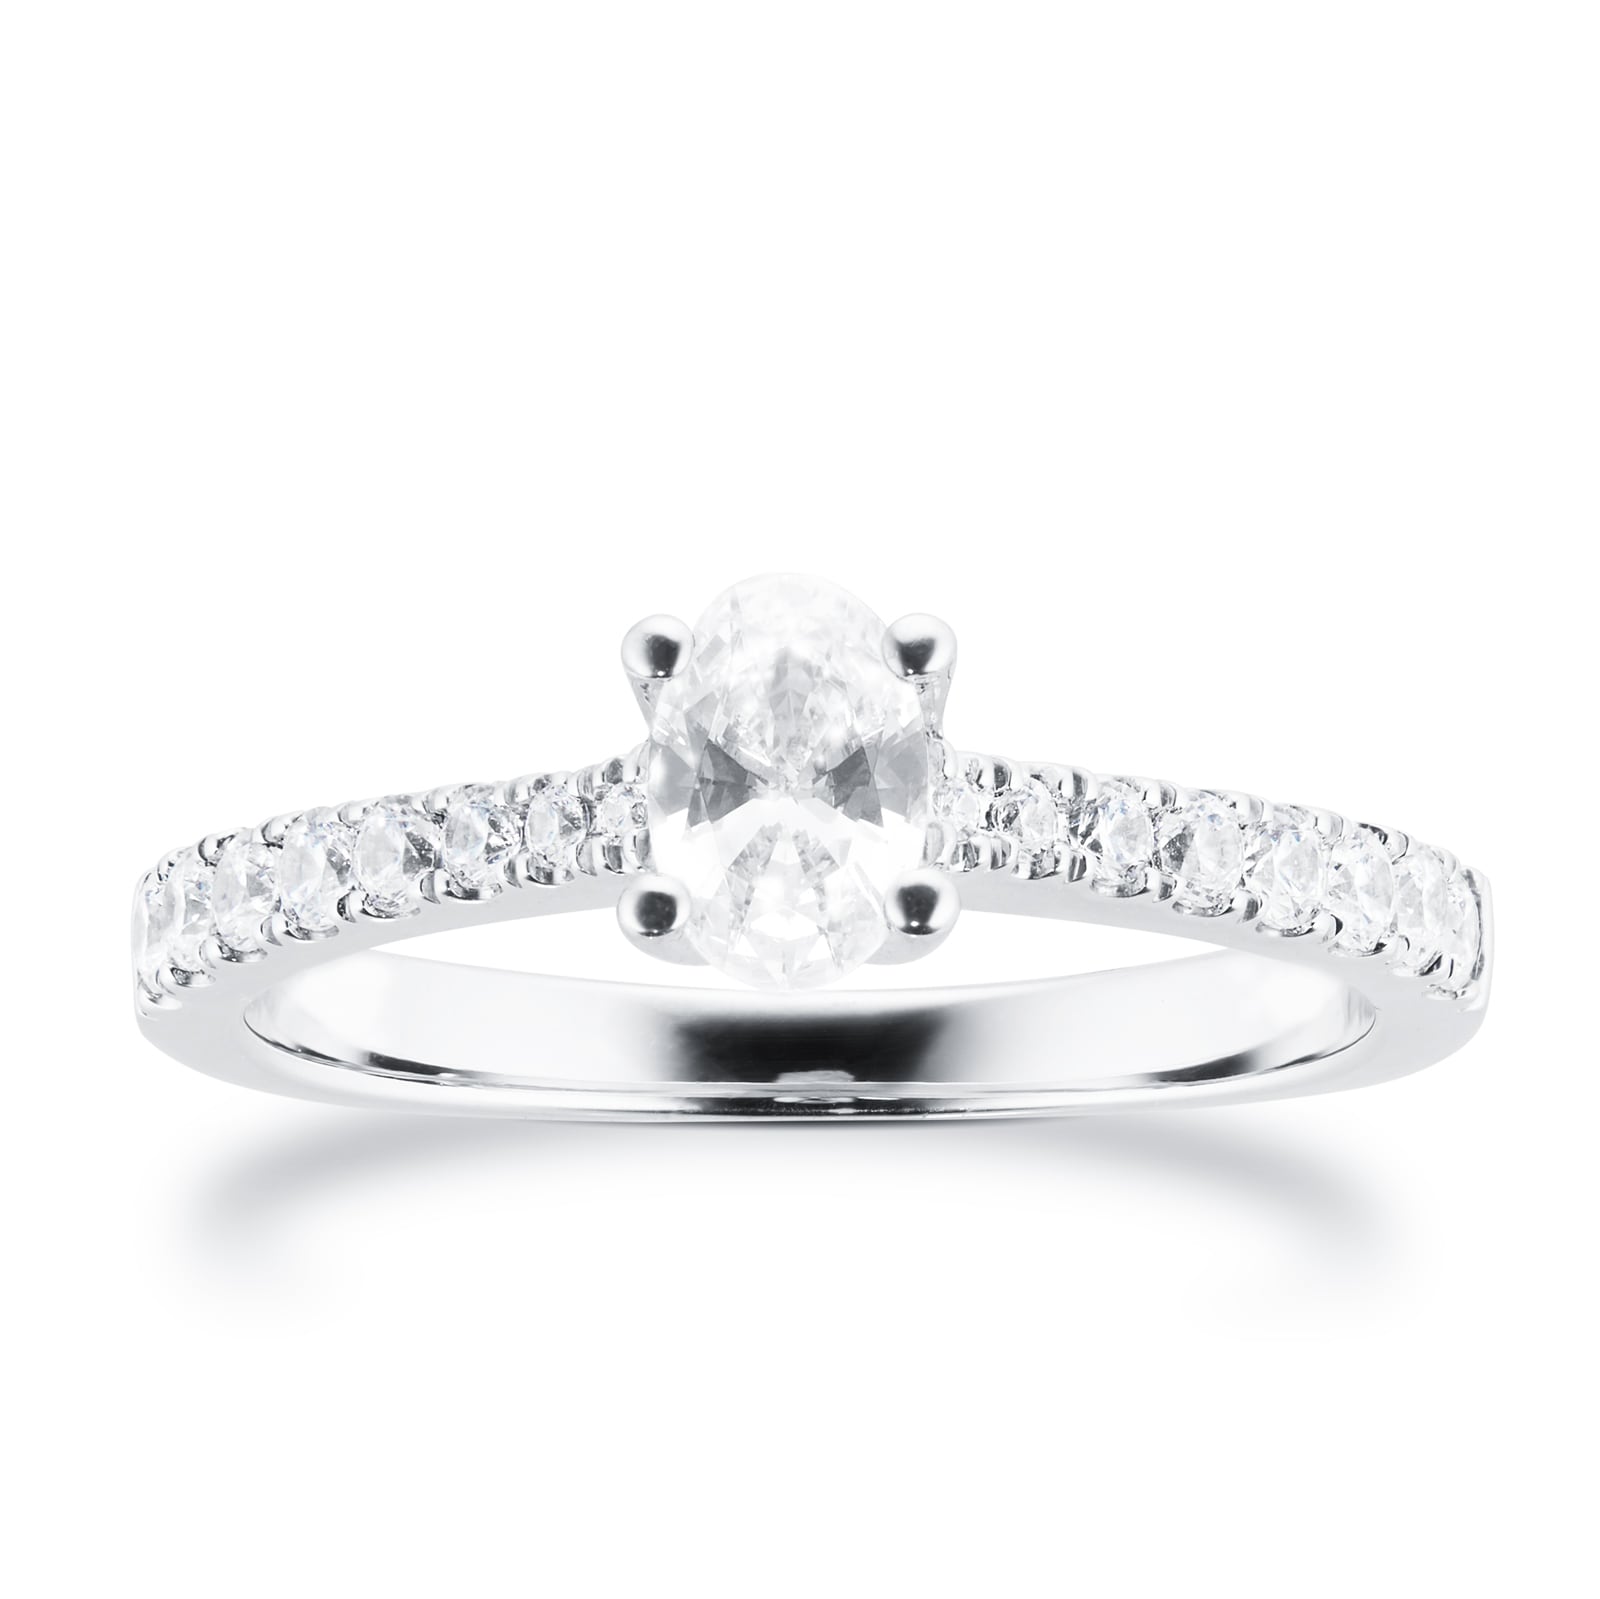 Platinum 0.70cttw Goldsmiths Brightest Diamond Oval Cut Solitaire Engagement Ring - Ring Size O